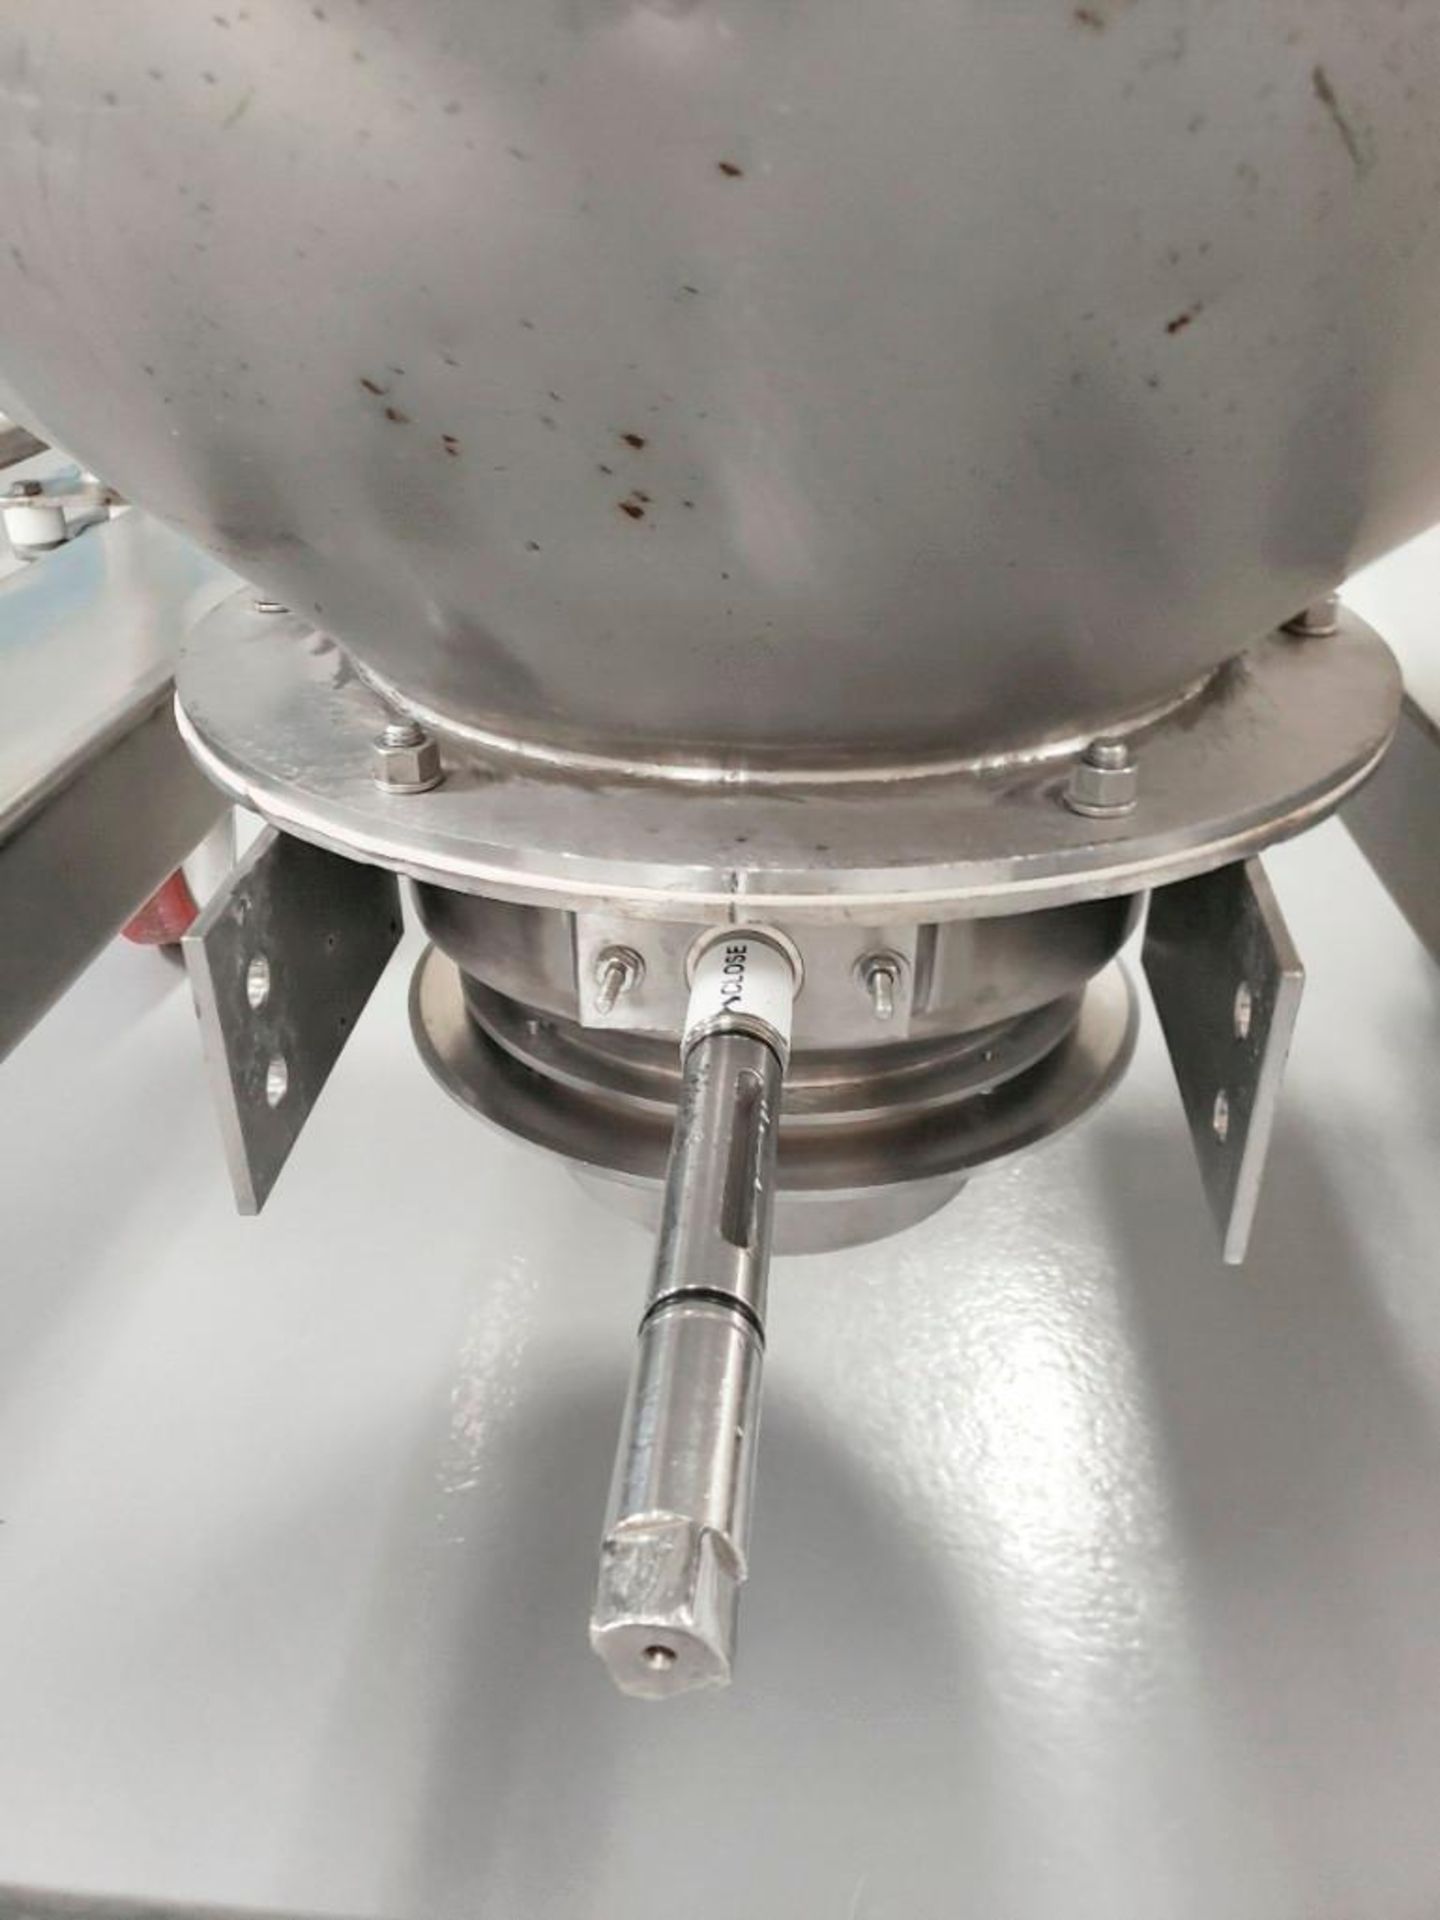 700Kg Capacity Charge Kettle - Image 12 of 12